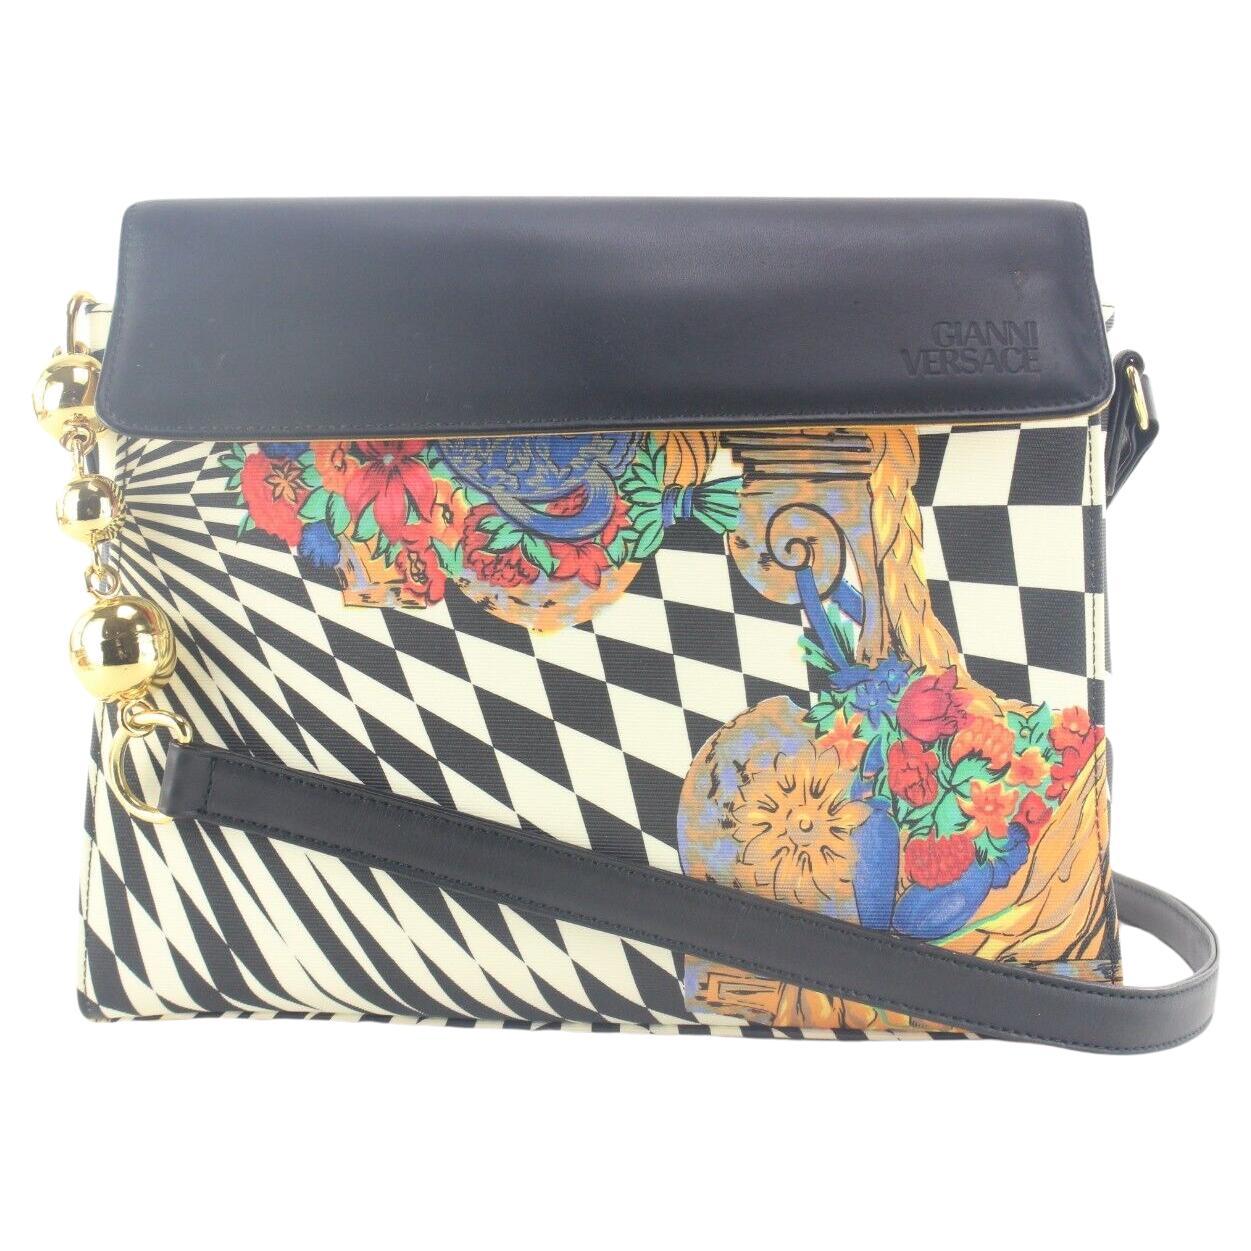 Gianni Versace Rare Psychedelic Illusion Crossbody 1GV912K For Sale